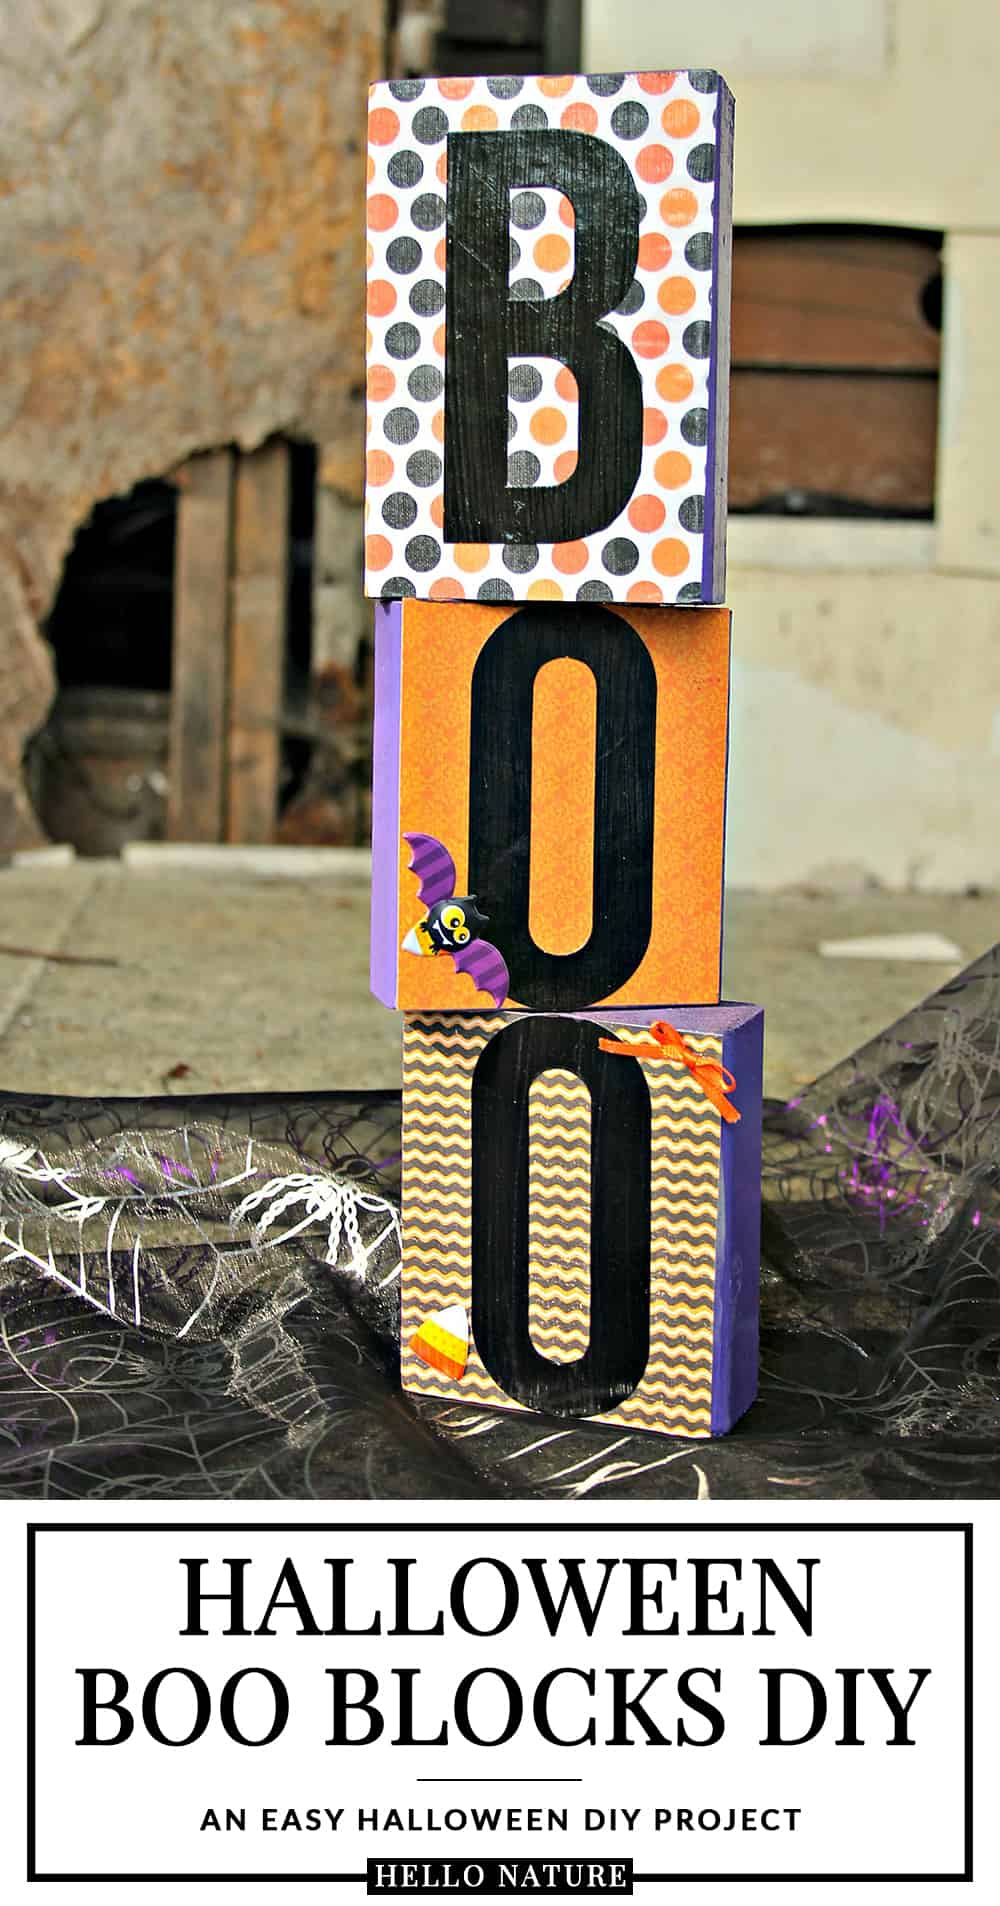 This indoor Halloween decor idea is the perfect craft project to add some fun decor to your home! These Boo Blocks are simple to make with just a few supplies and they'll make a great addition to your Halloween party table! #Halloween #HalloweenDIY #HalloweenDecor #WoodDIY